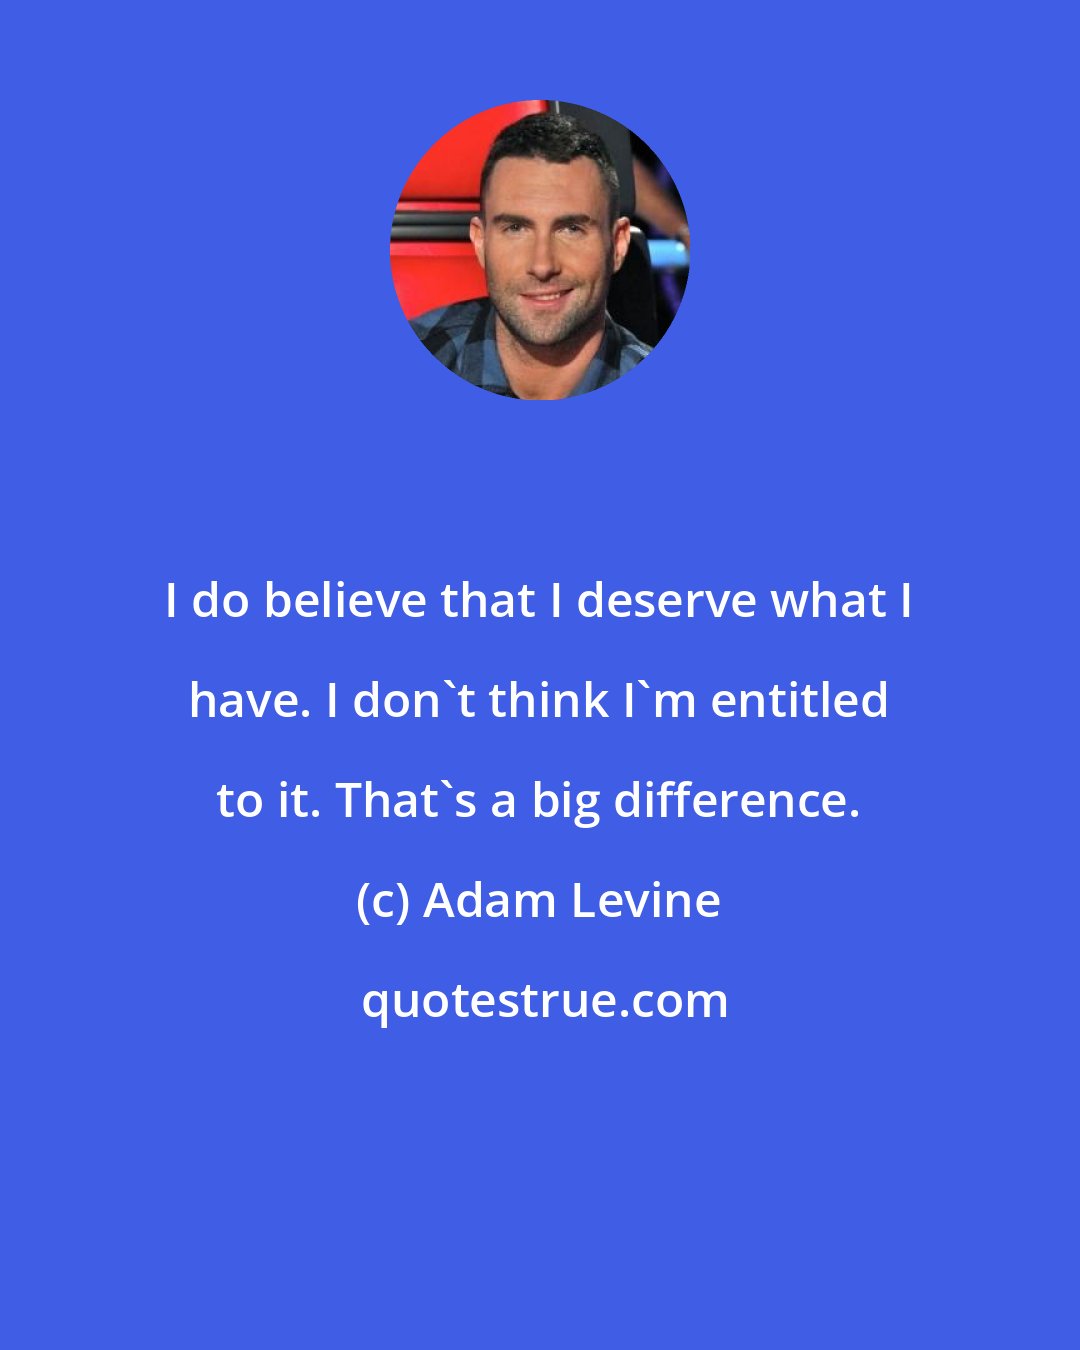 Adam Levine: I do believe that I deserve what I have. I don't think I'm entitled to it. That's a big difference.